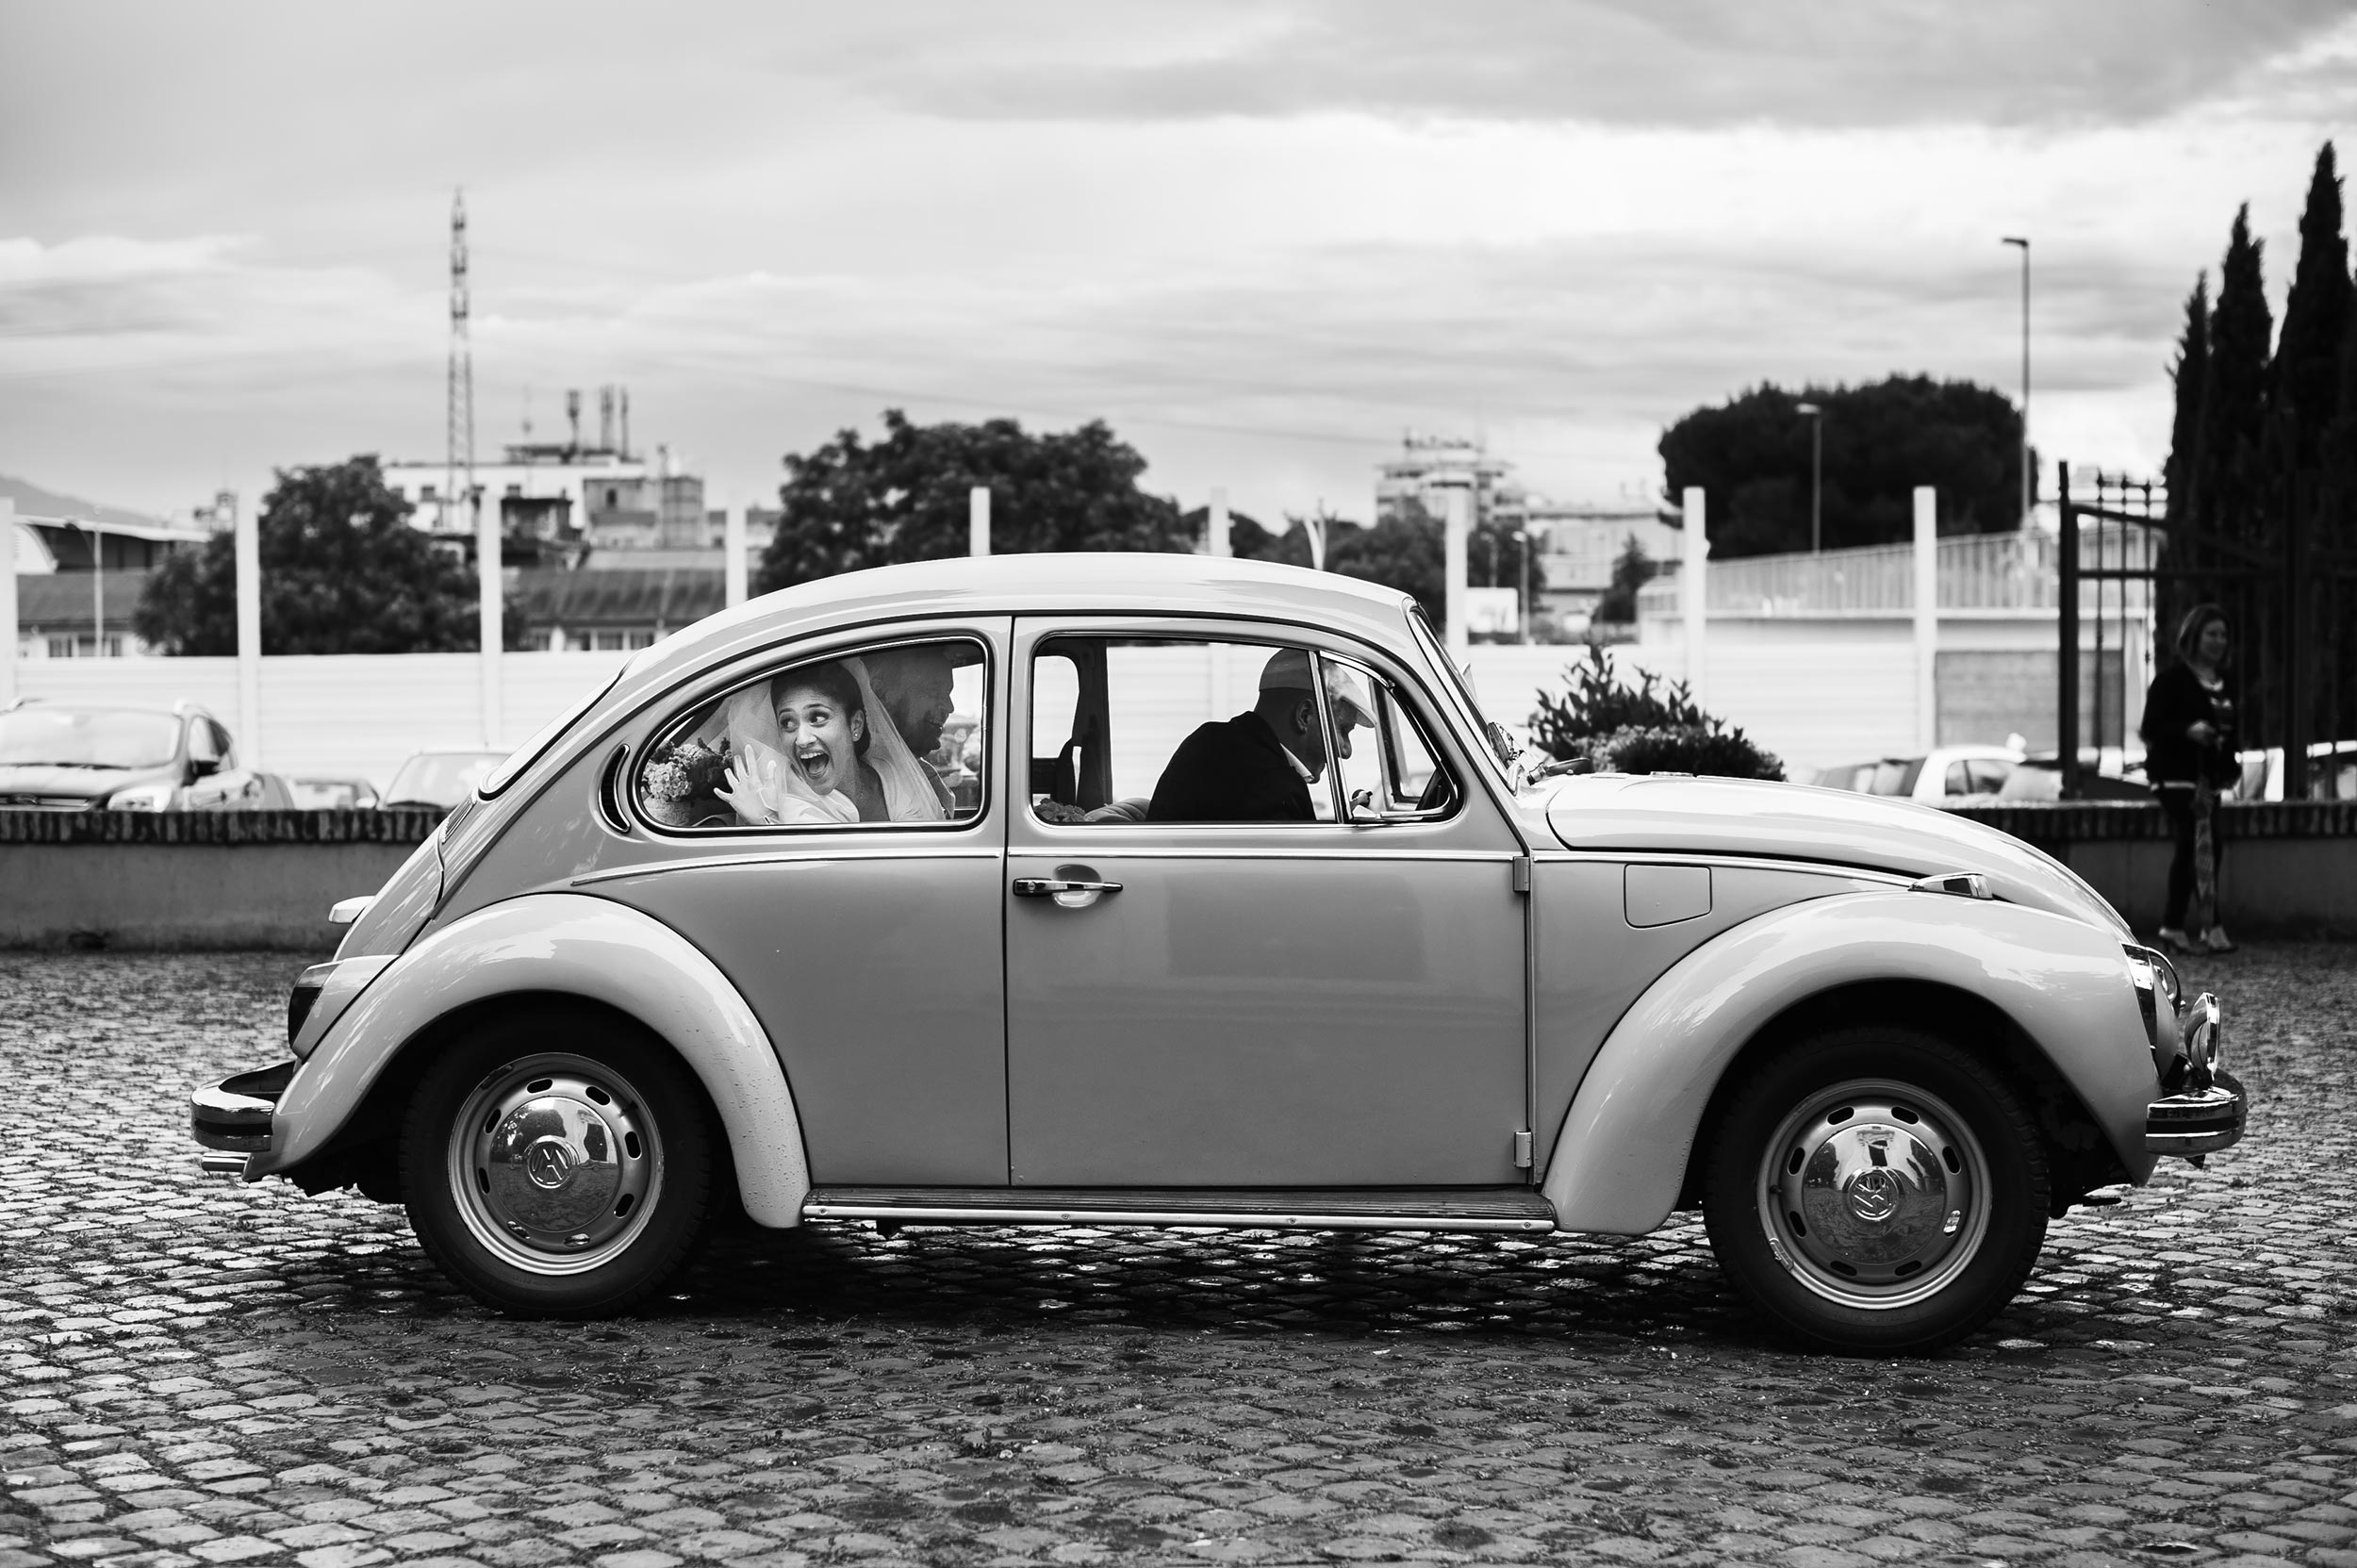 the-bride-arrives-in-old-volkswagen-beetle-italy-black-and-white-wedding-photography.jpg